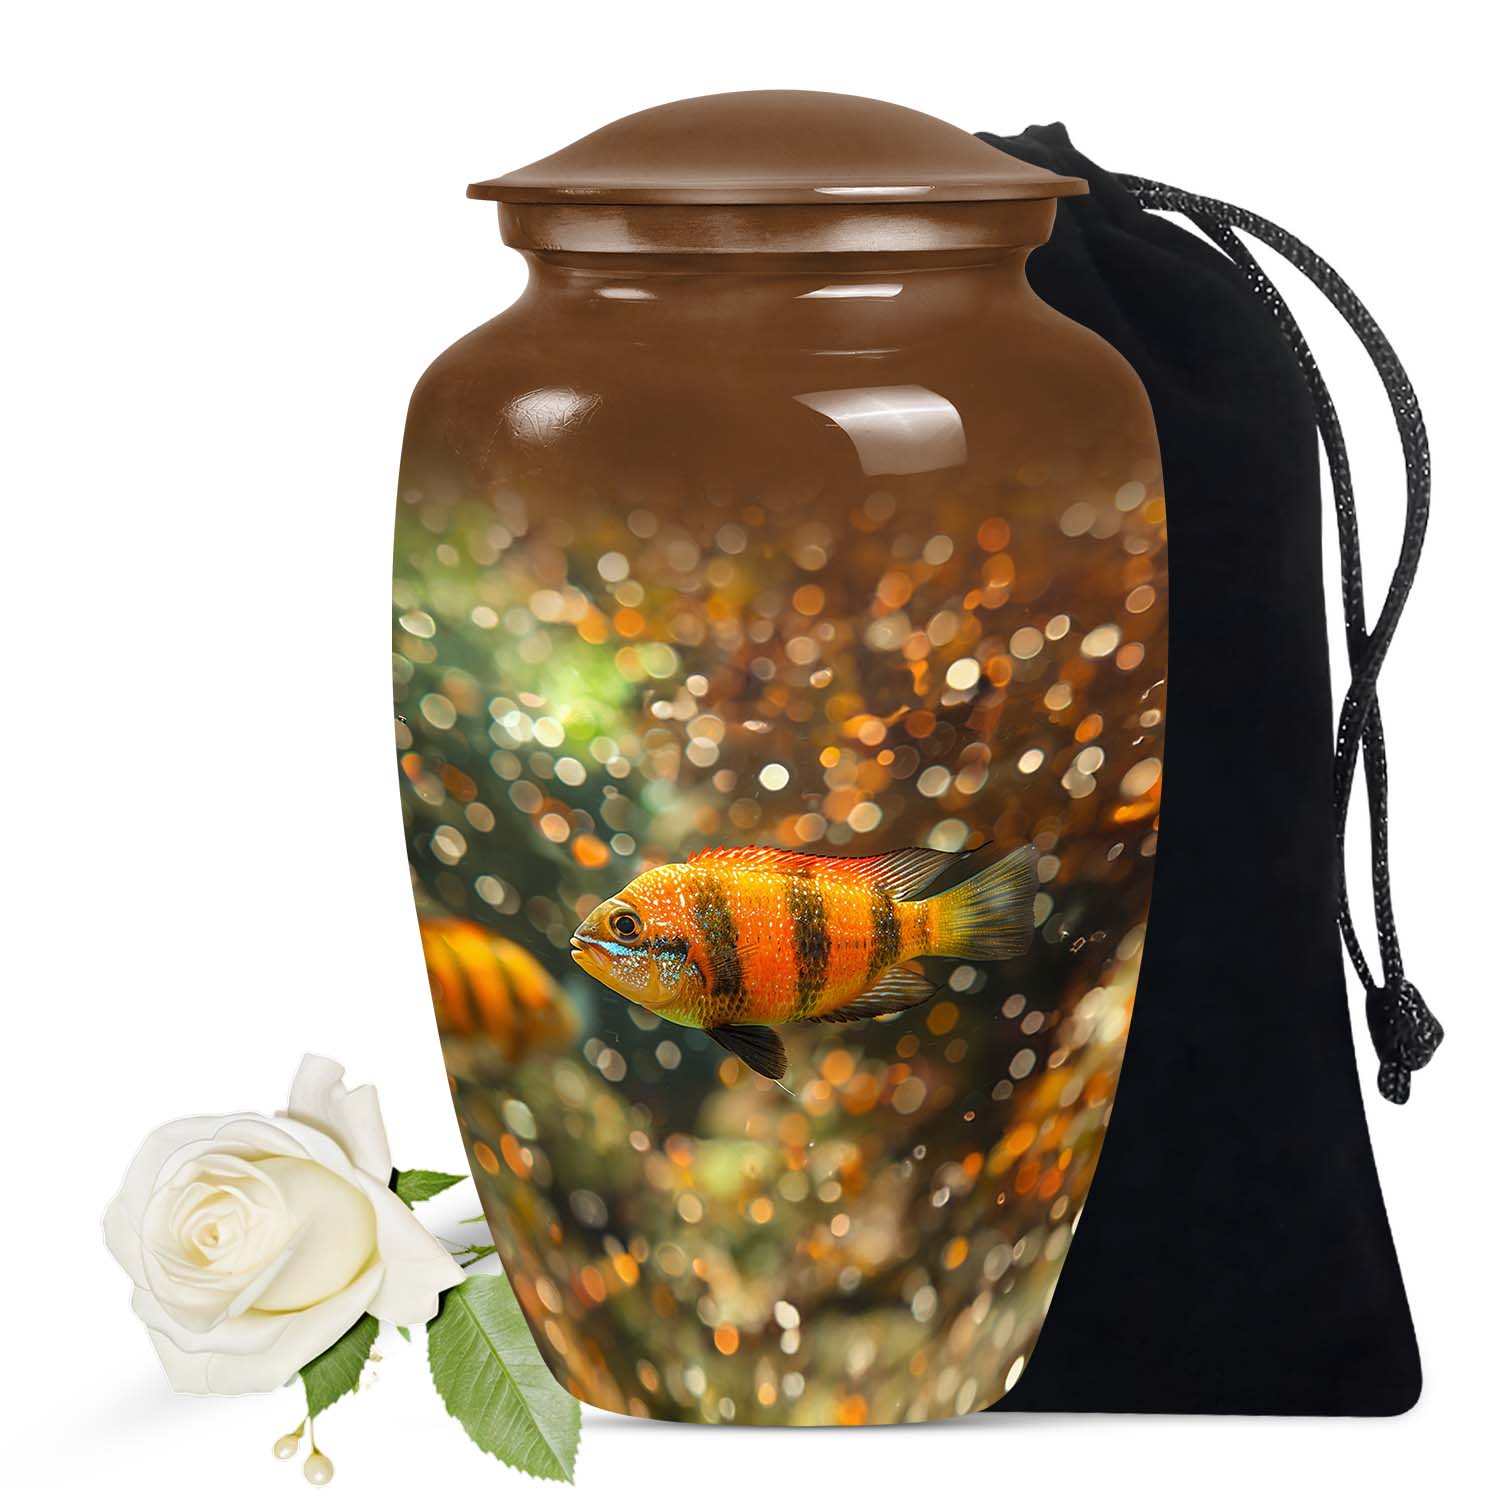 Harmony Angelfish Urn, large and stylish burial urn for adult human ashes